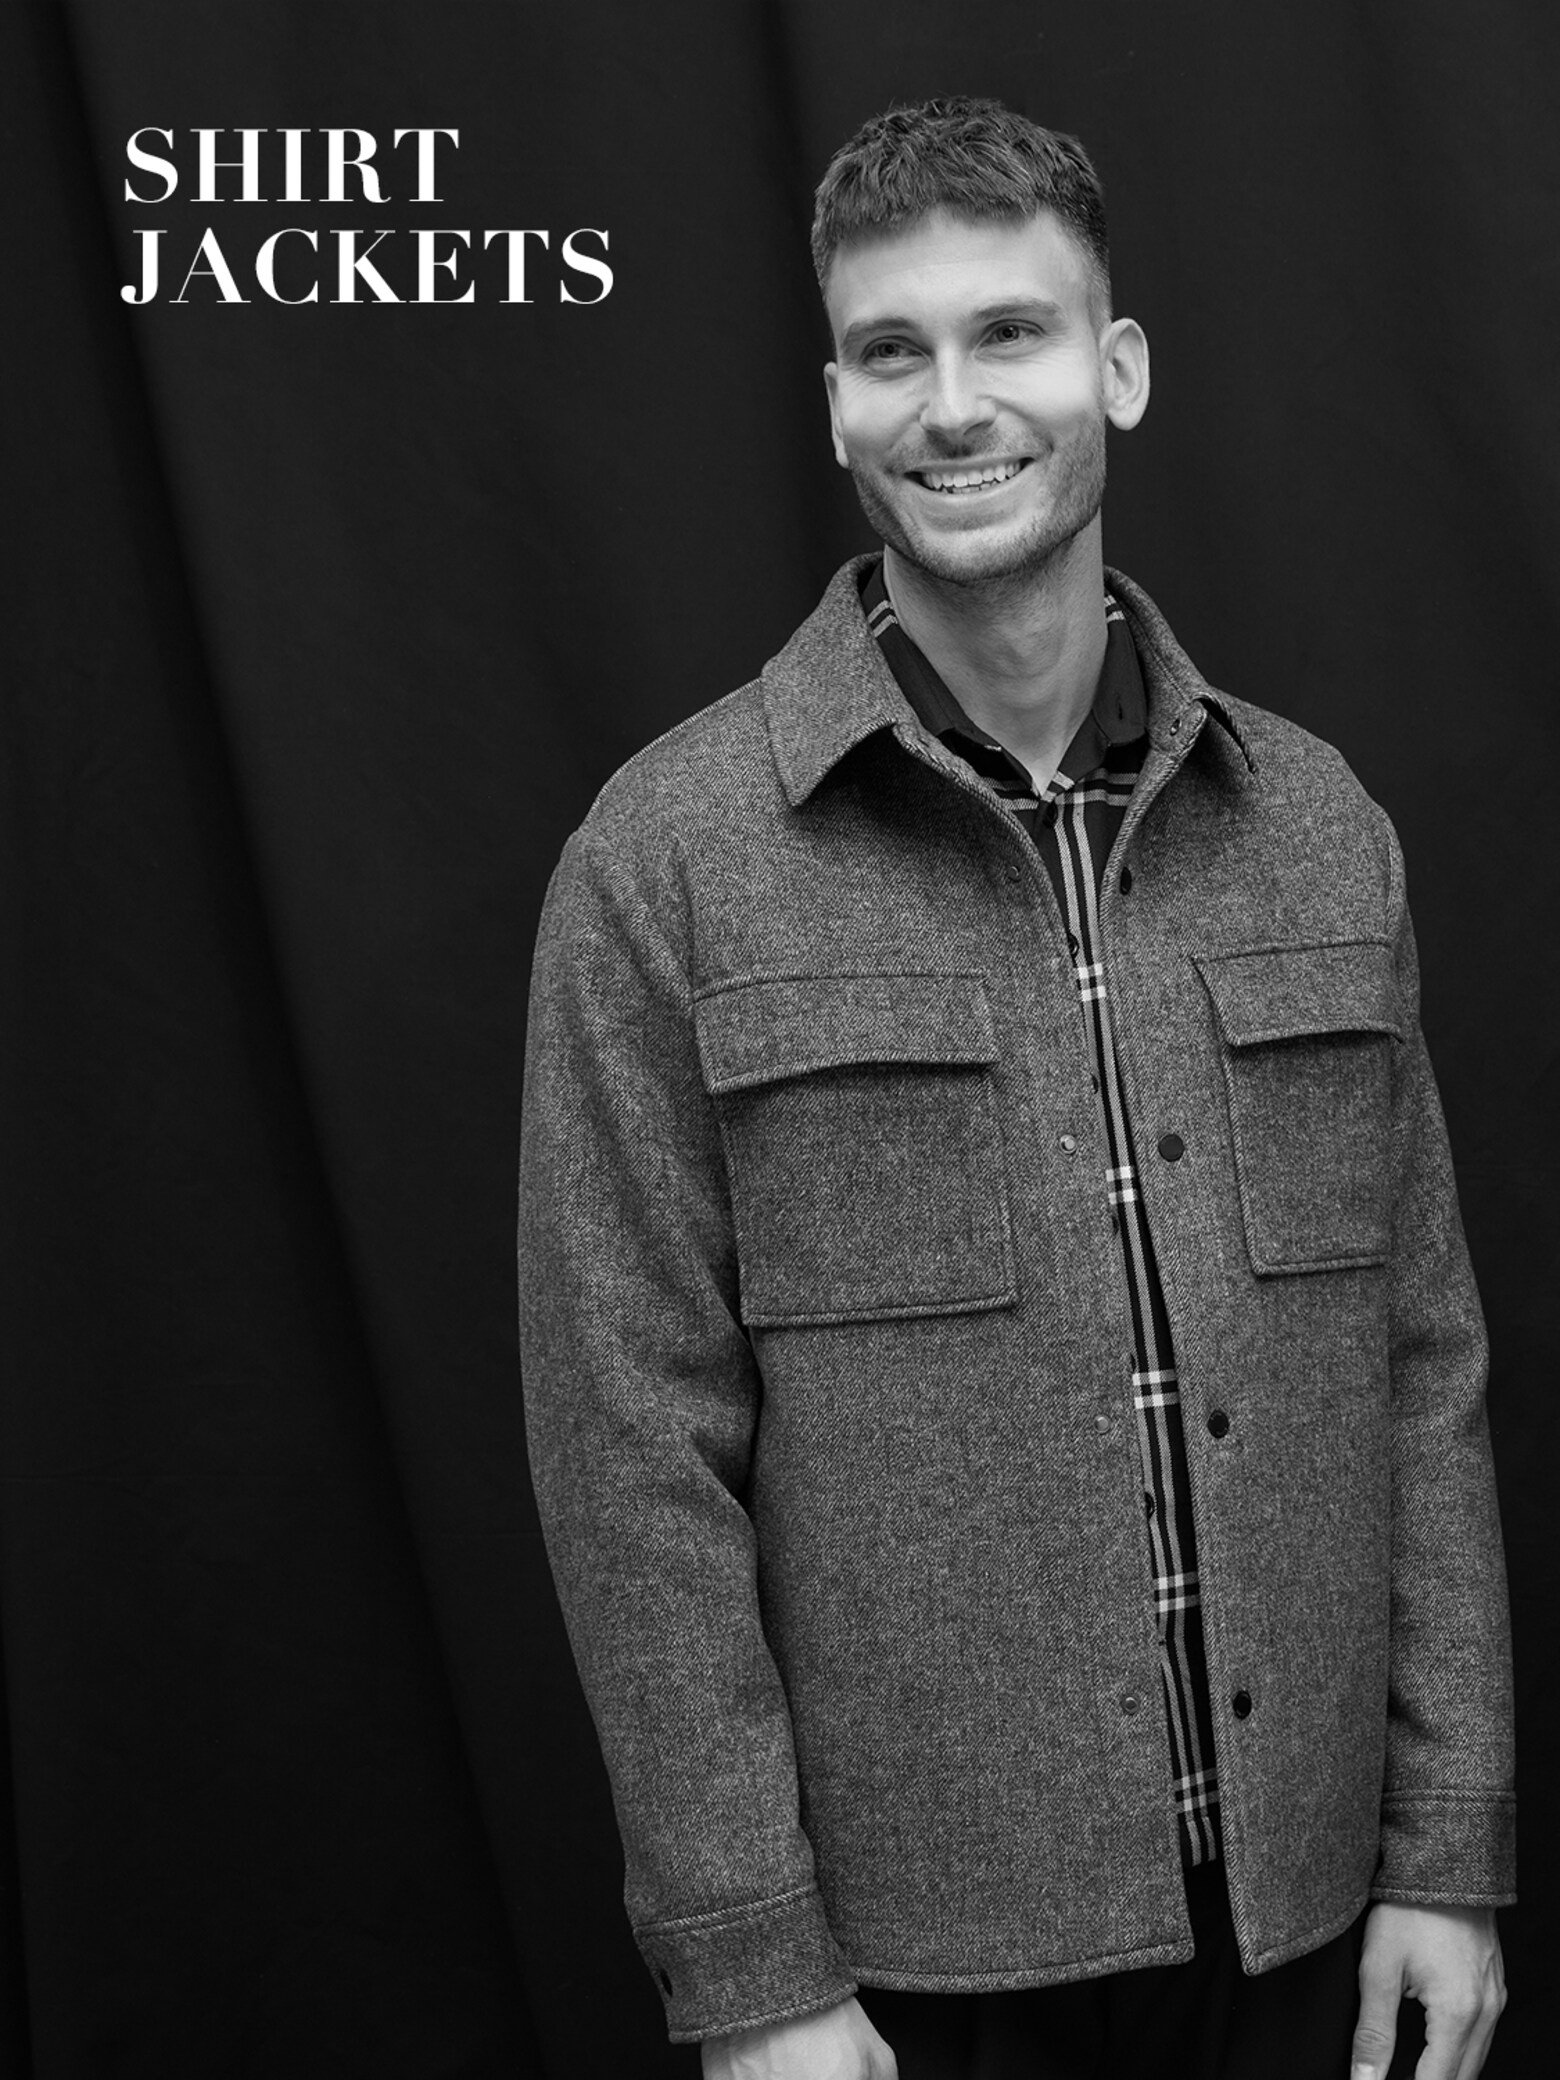 The top styles in autumn Jackets